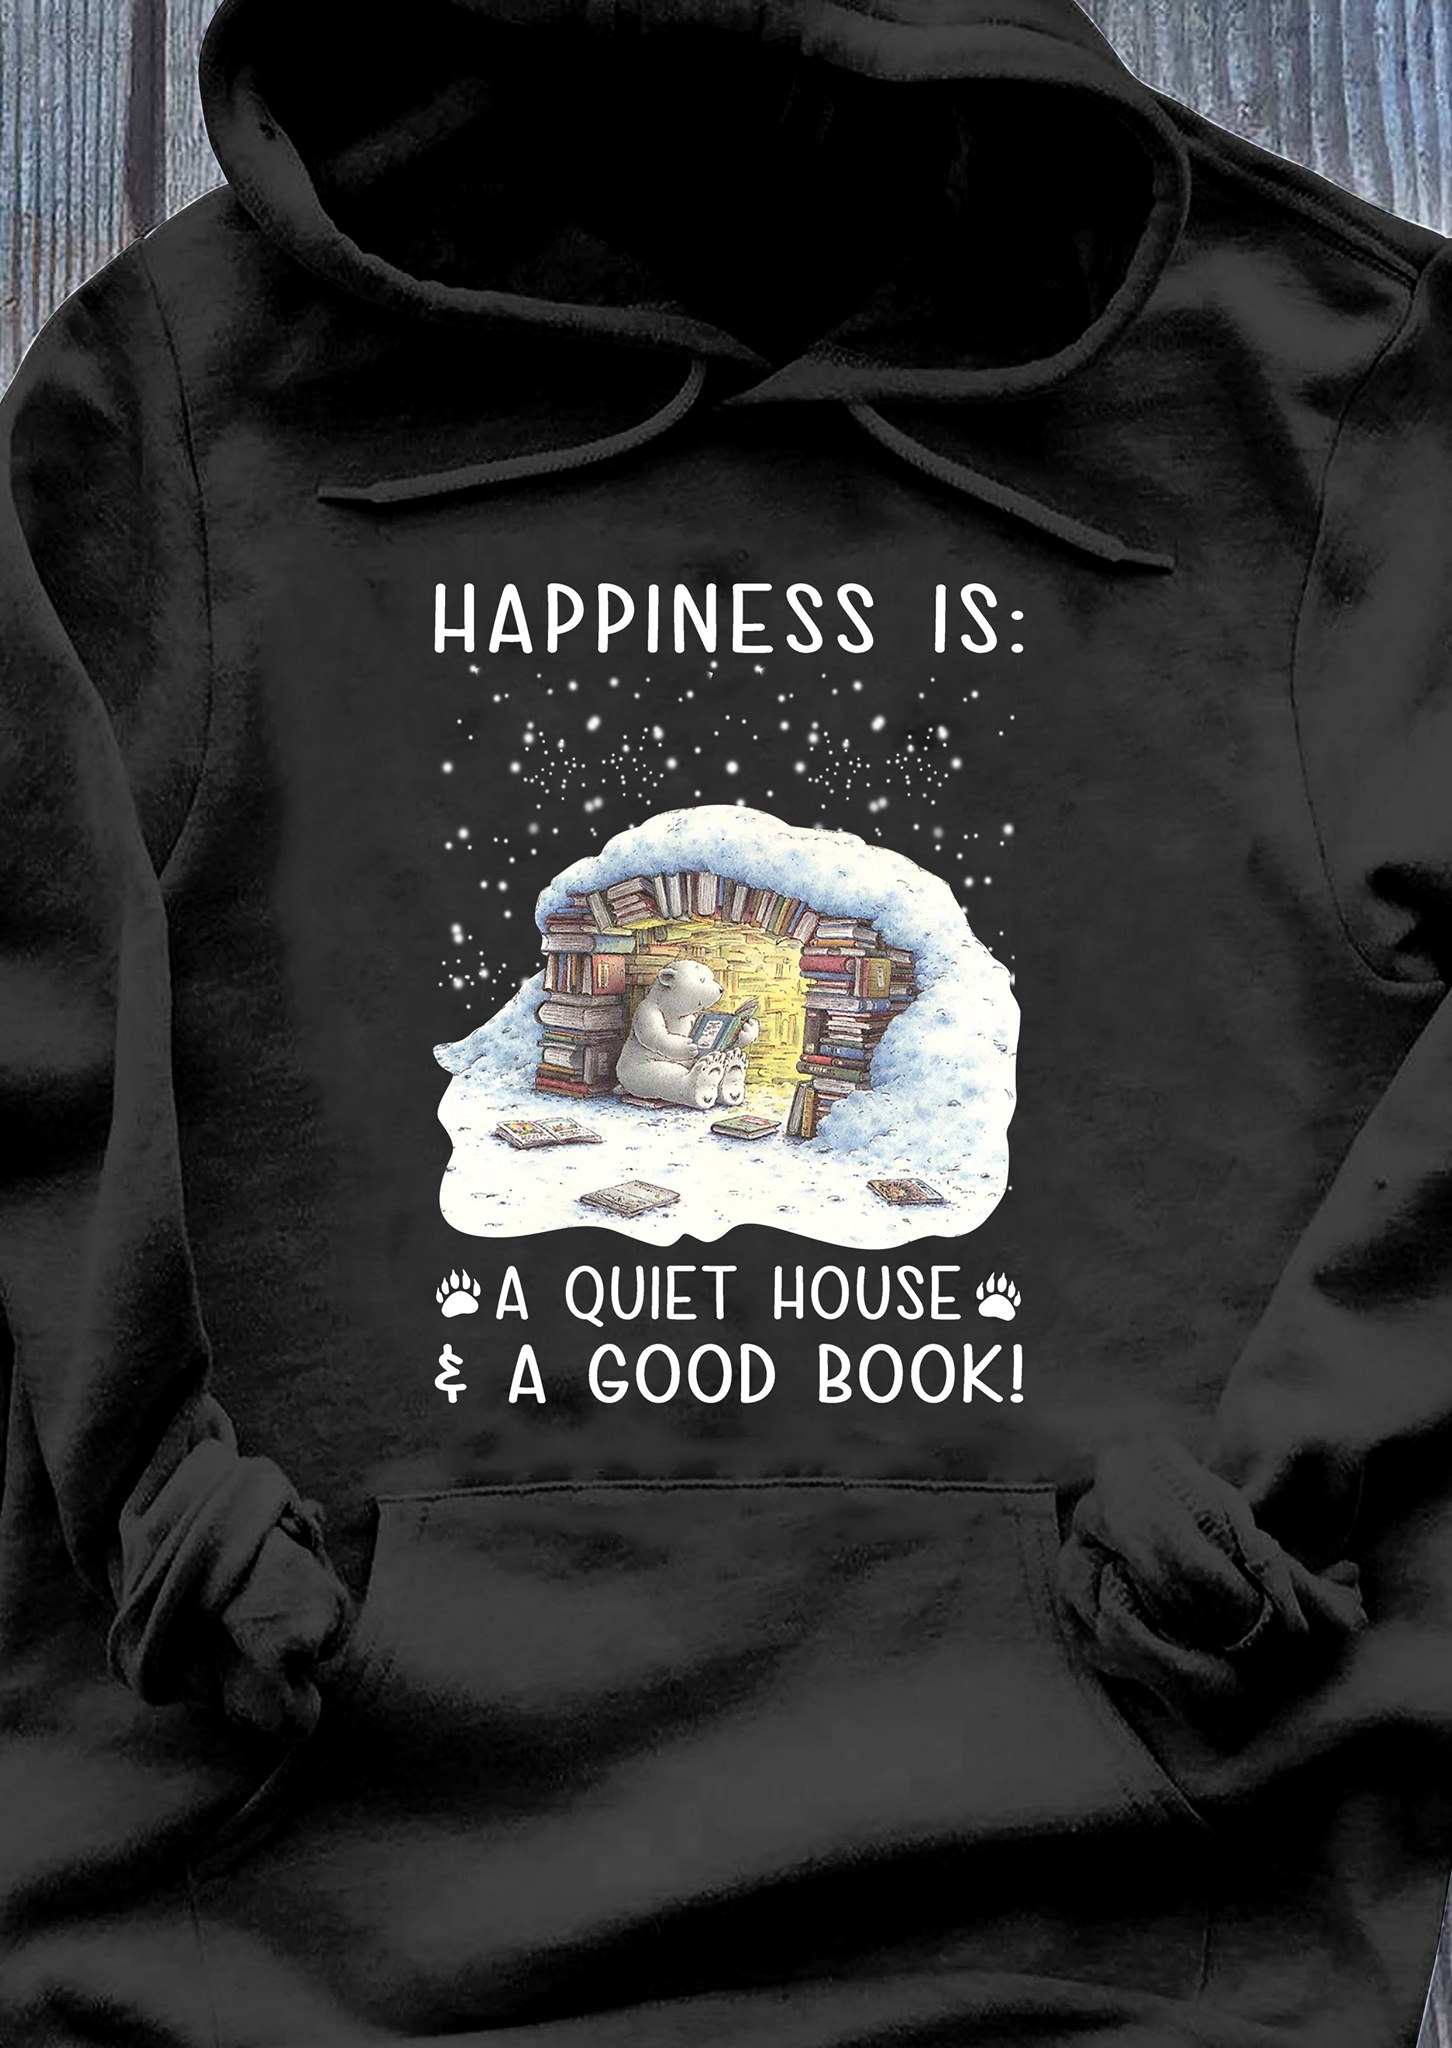 Happiness is a quiet house a good book!